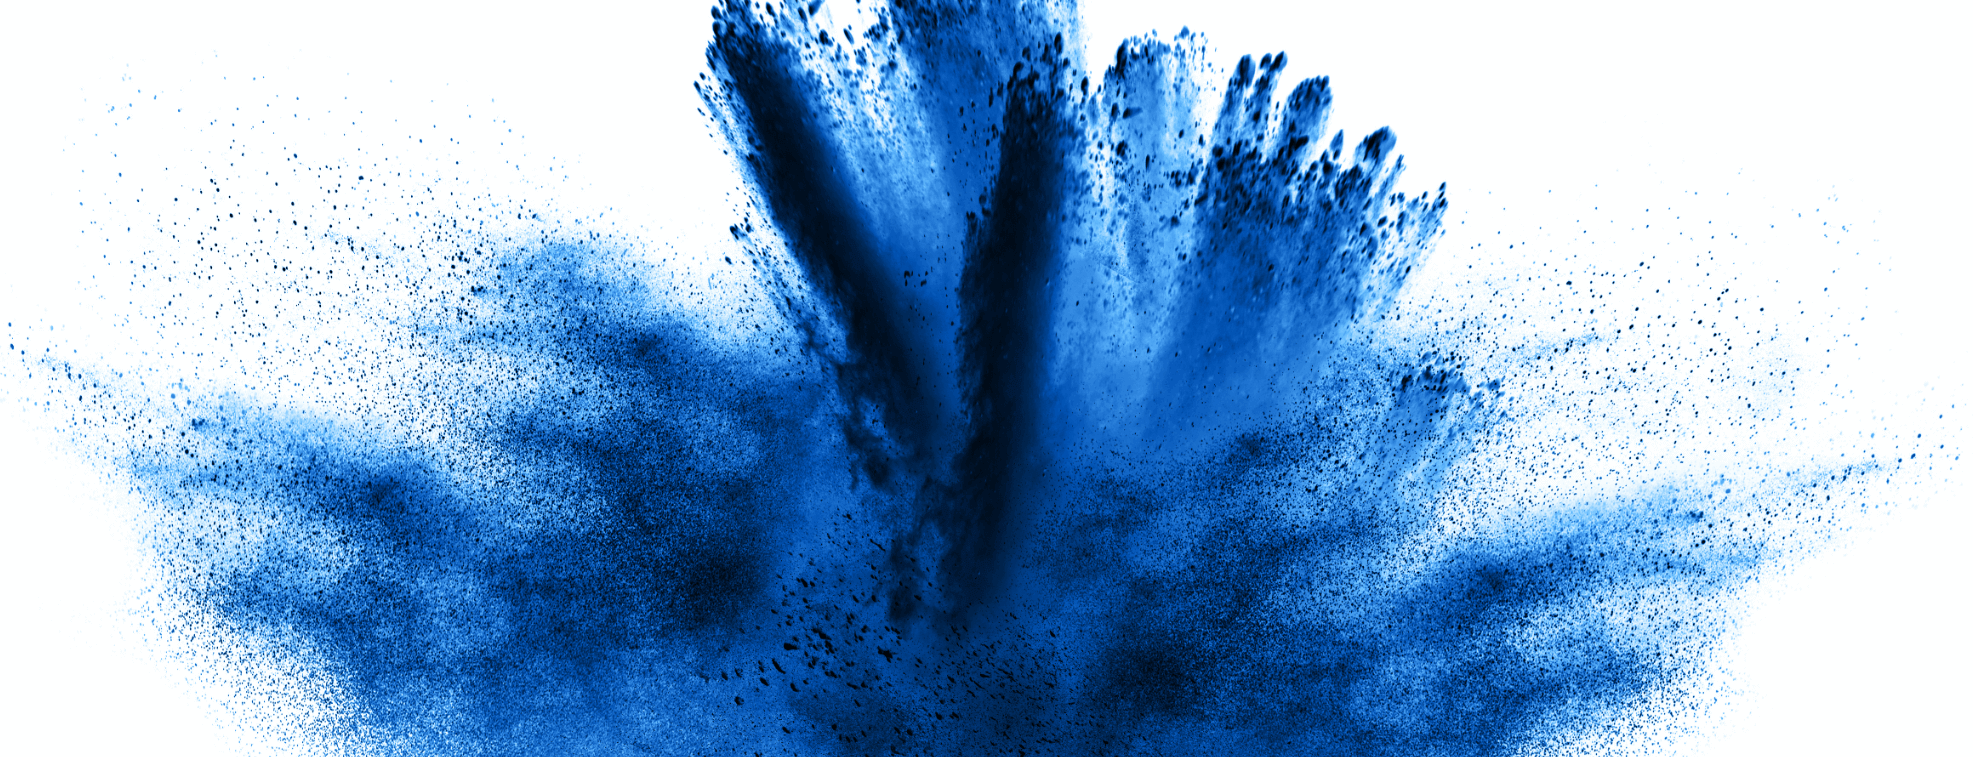 Blue color paint spread over white background